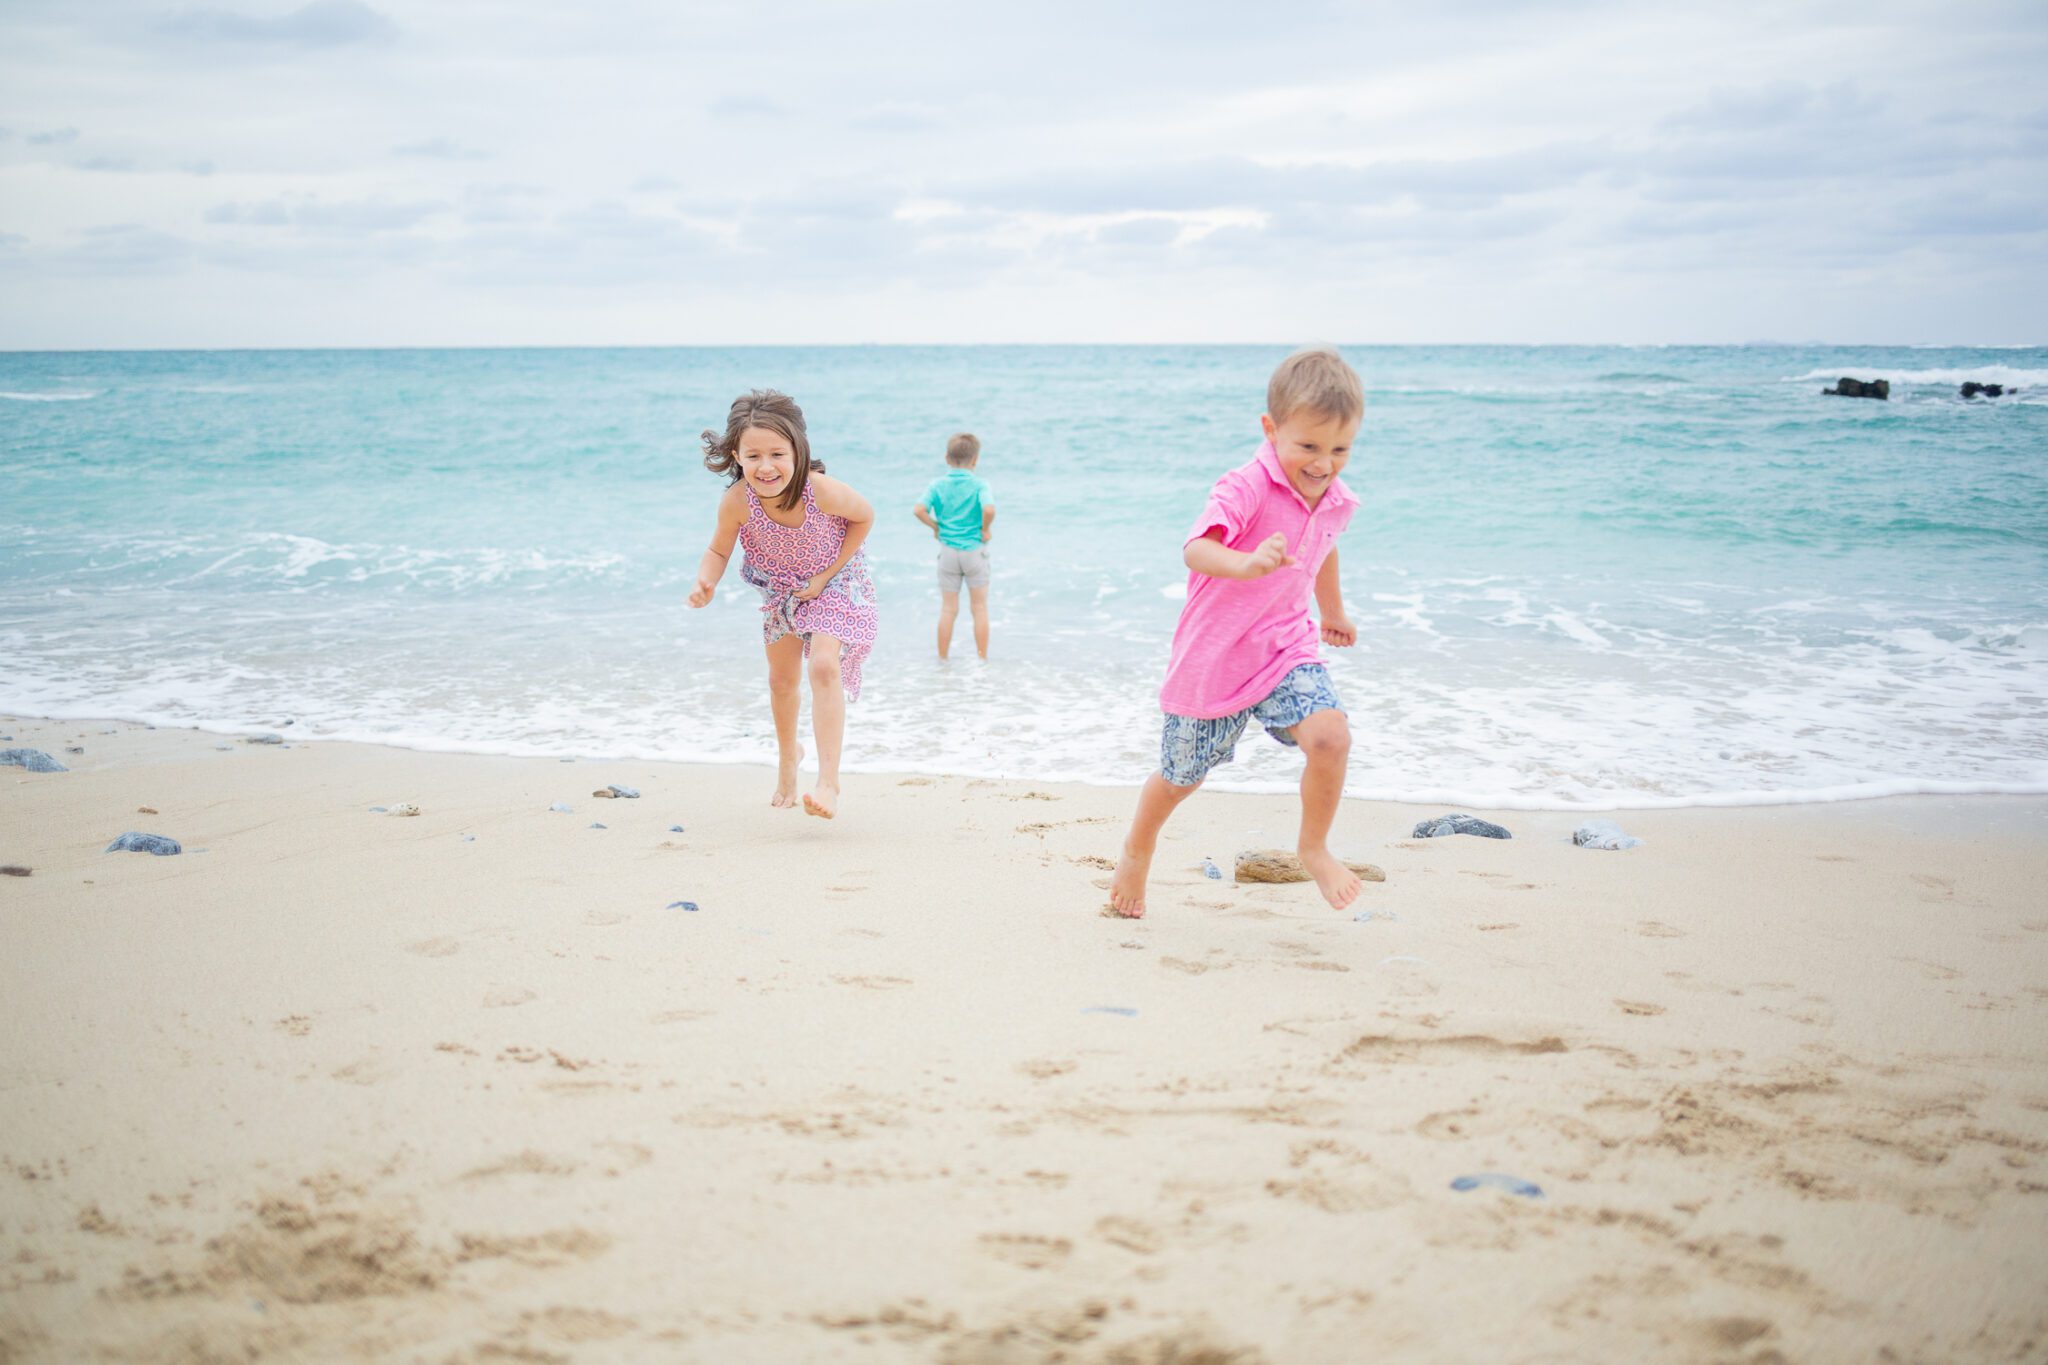 Best beaches in Oahu for families by alison bell, photographer